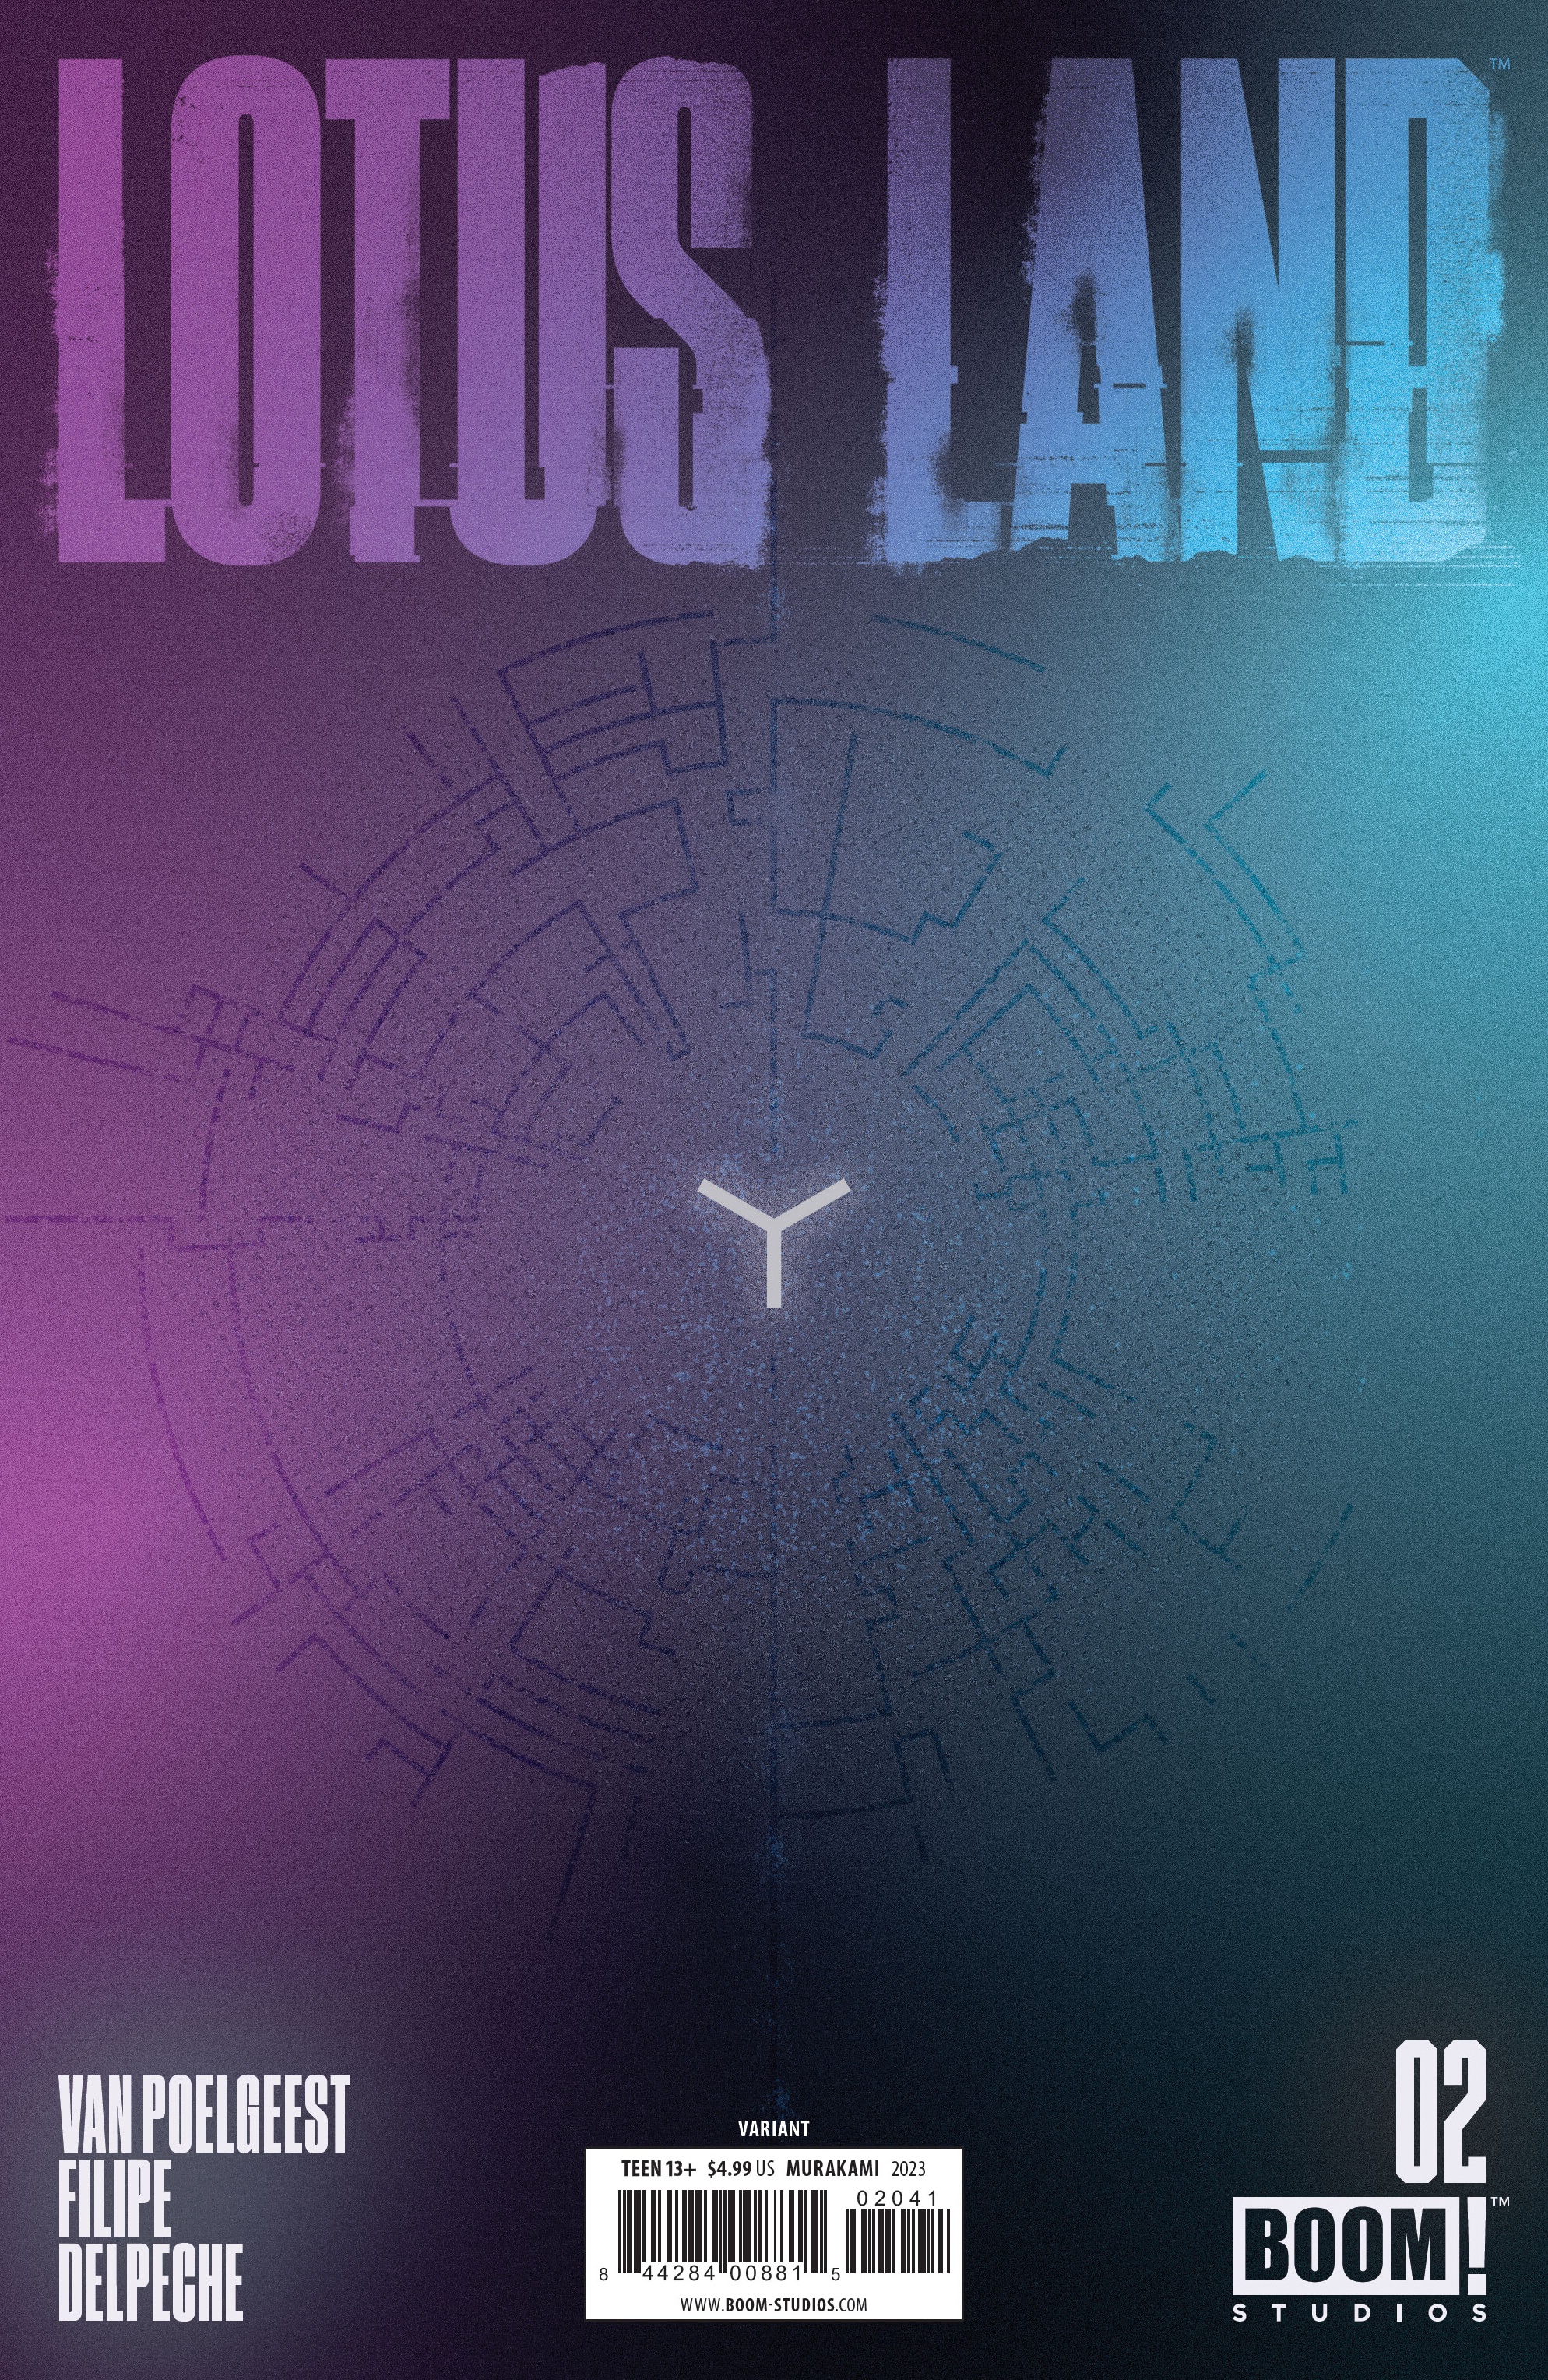 Read online Lotus Land comic -  Issue #2 - 37